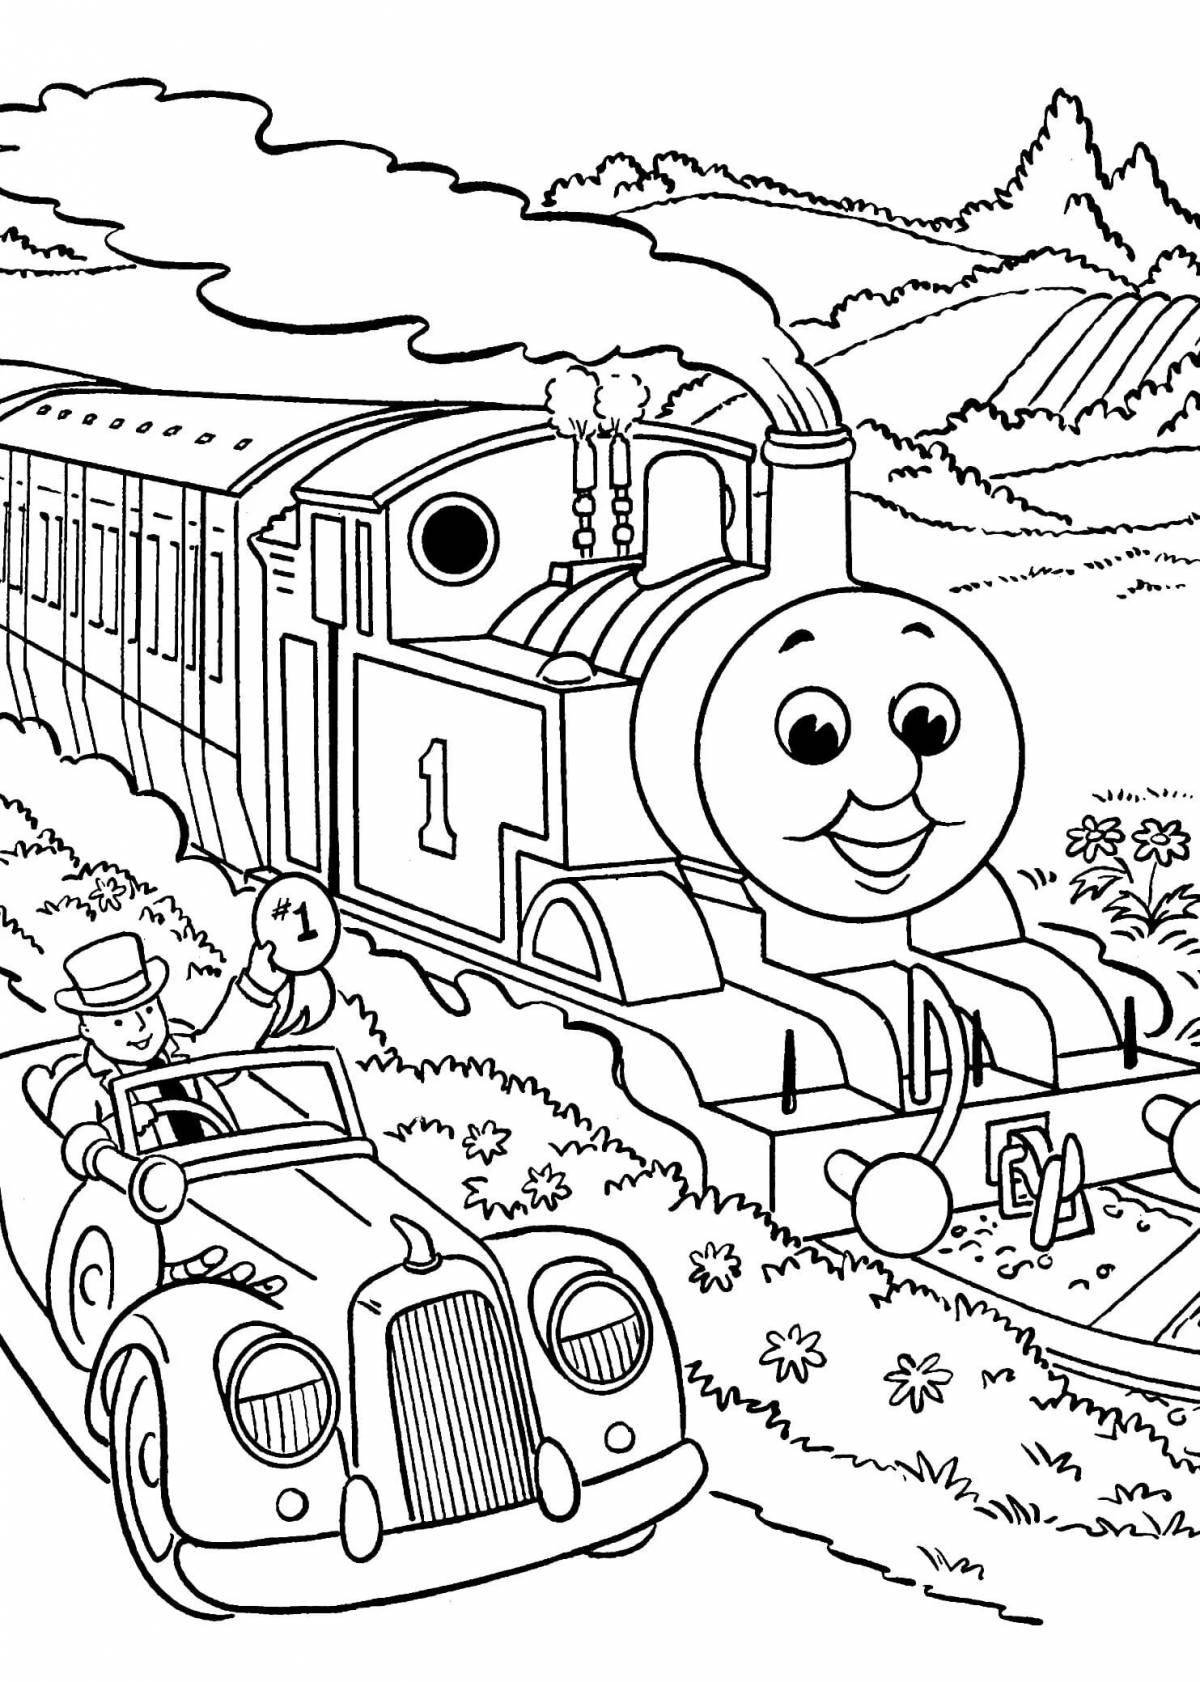 Great engine coloring page